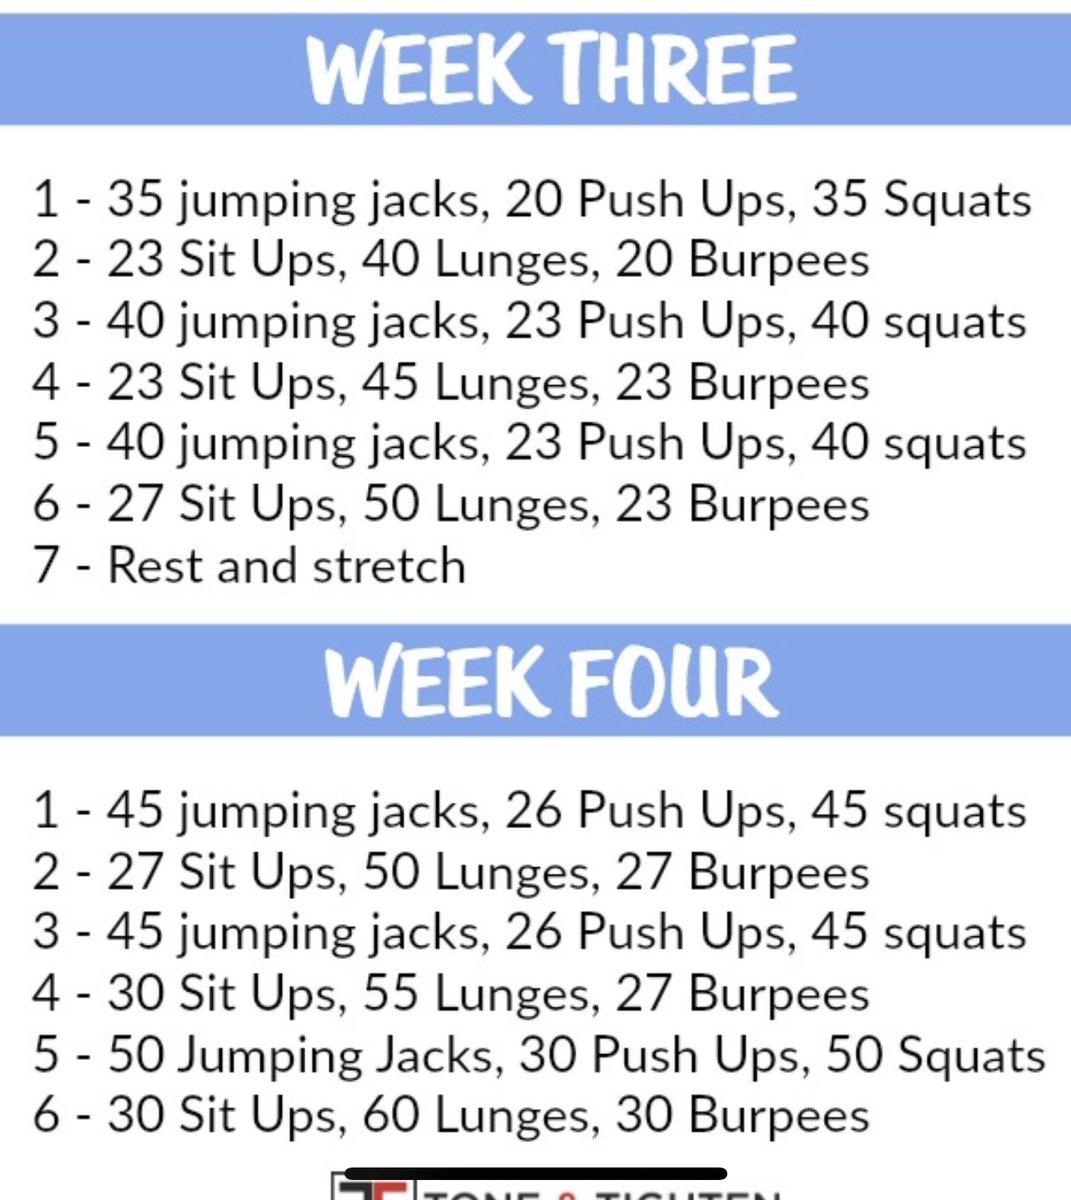 Looking to start exercising and don’t know where to begin? Check out this workout routine to get yourself started

#iup #khss #sportadmin #sportmgmt #sports #exercise #workout